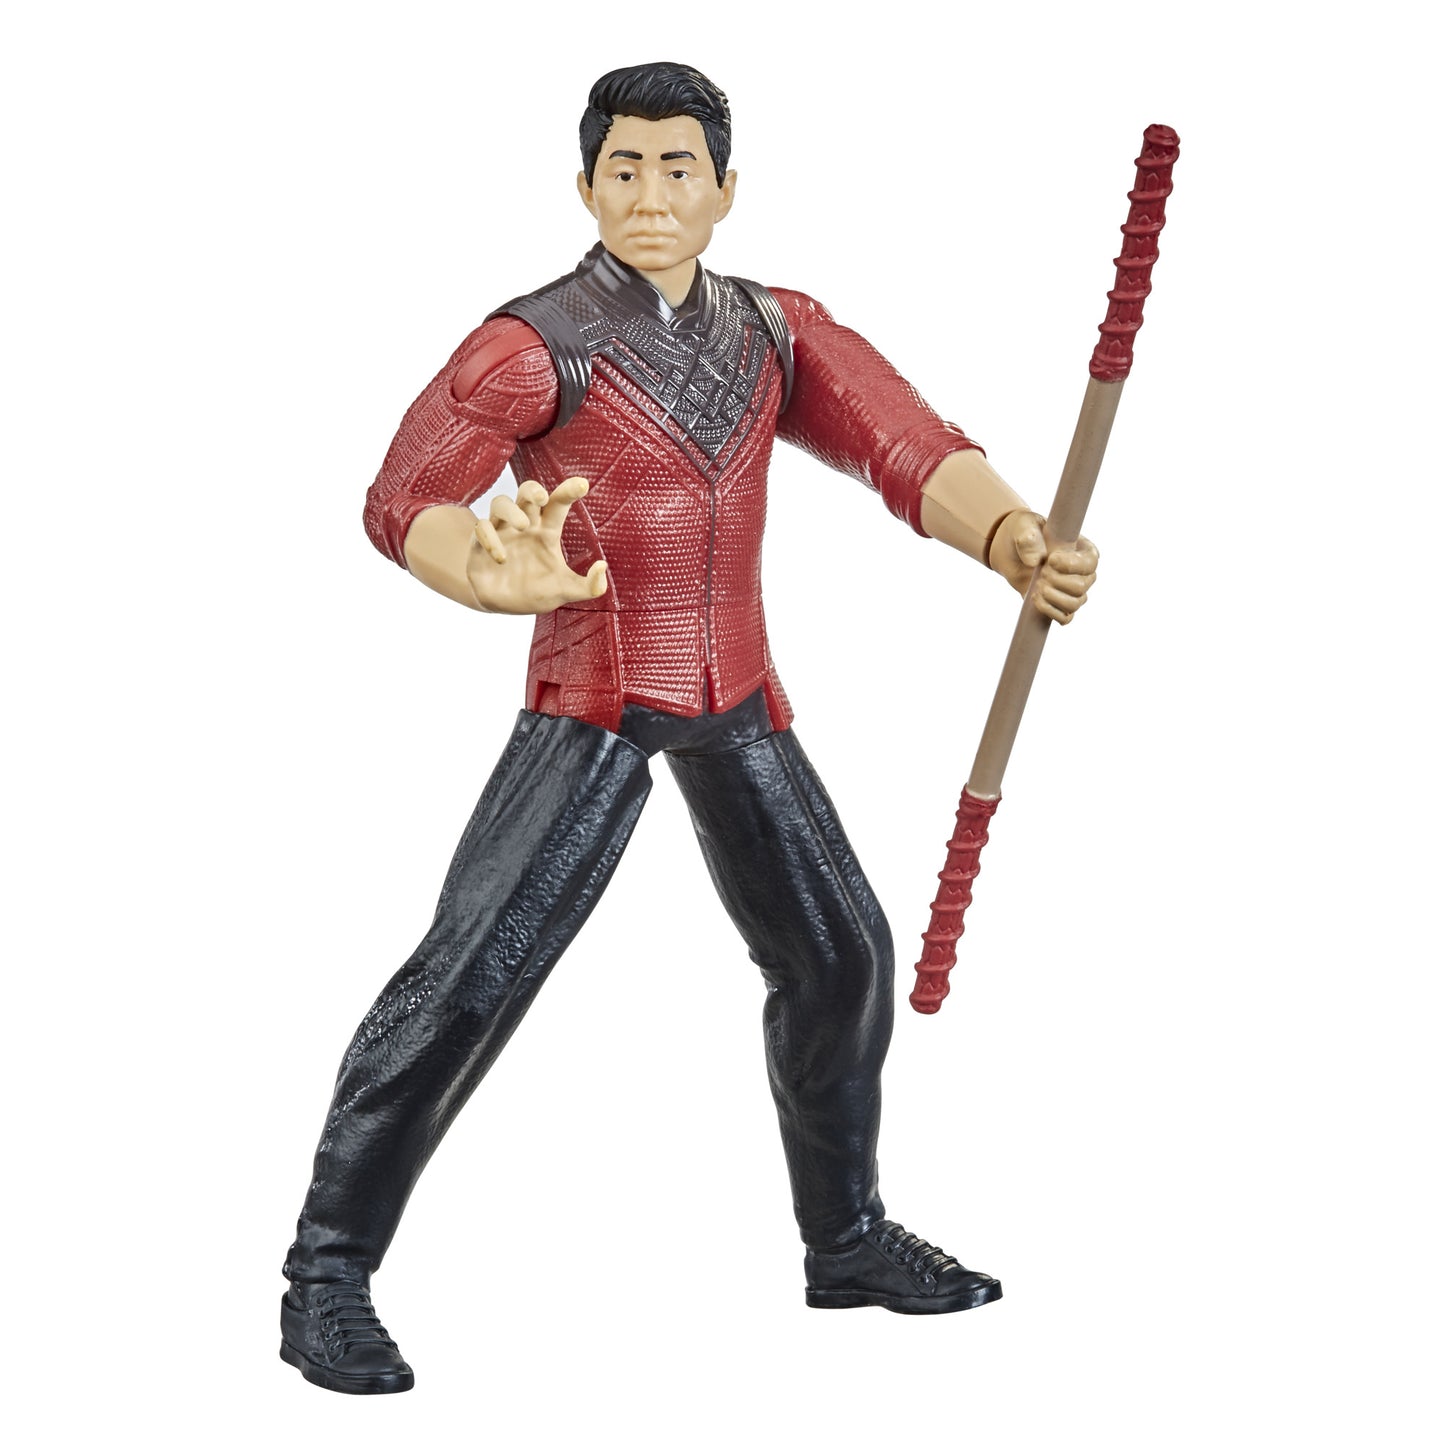 Shang-Chi and the Legend of the Ten Rings - Shang-Chi 6" Action Figure